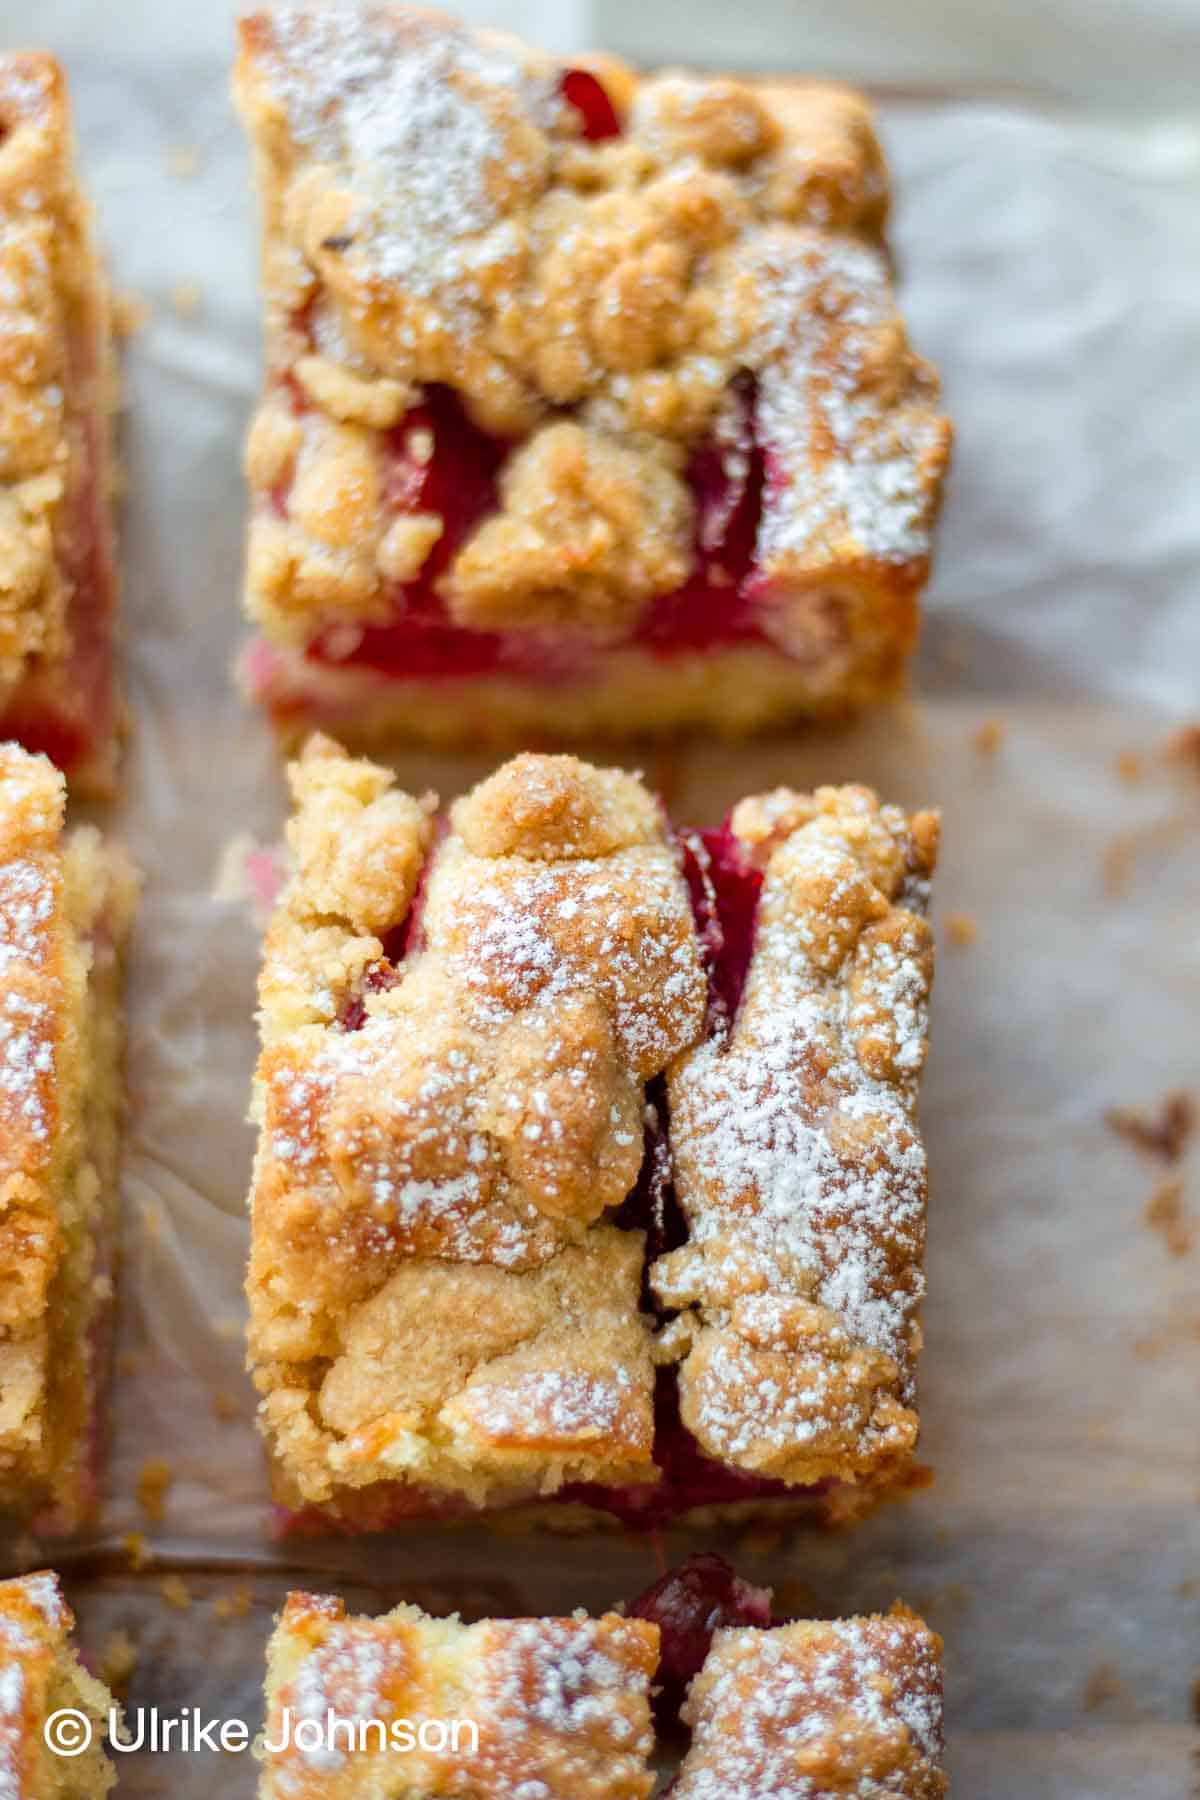 Traditional German Plum Crumble Cake with Streusel topping served sliced on a wooden board